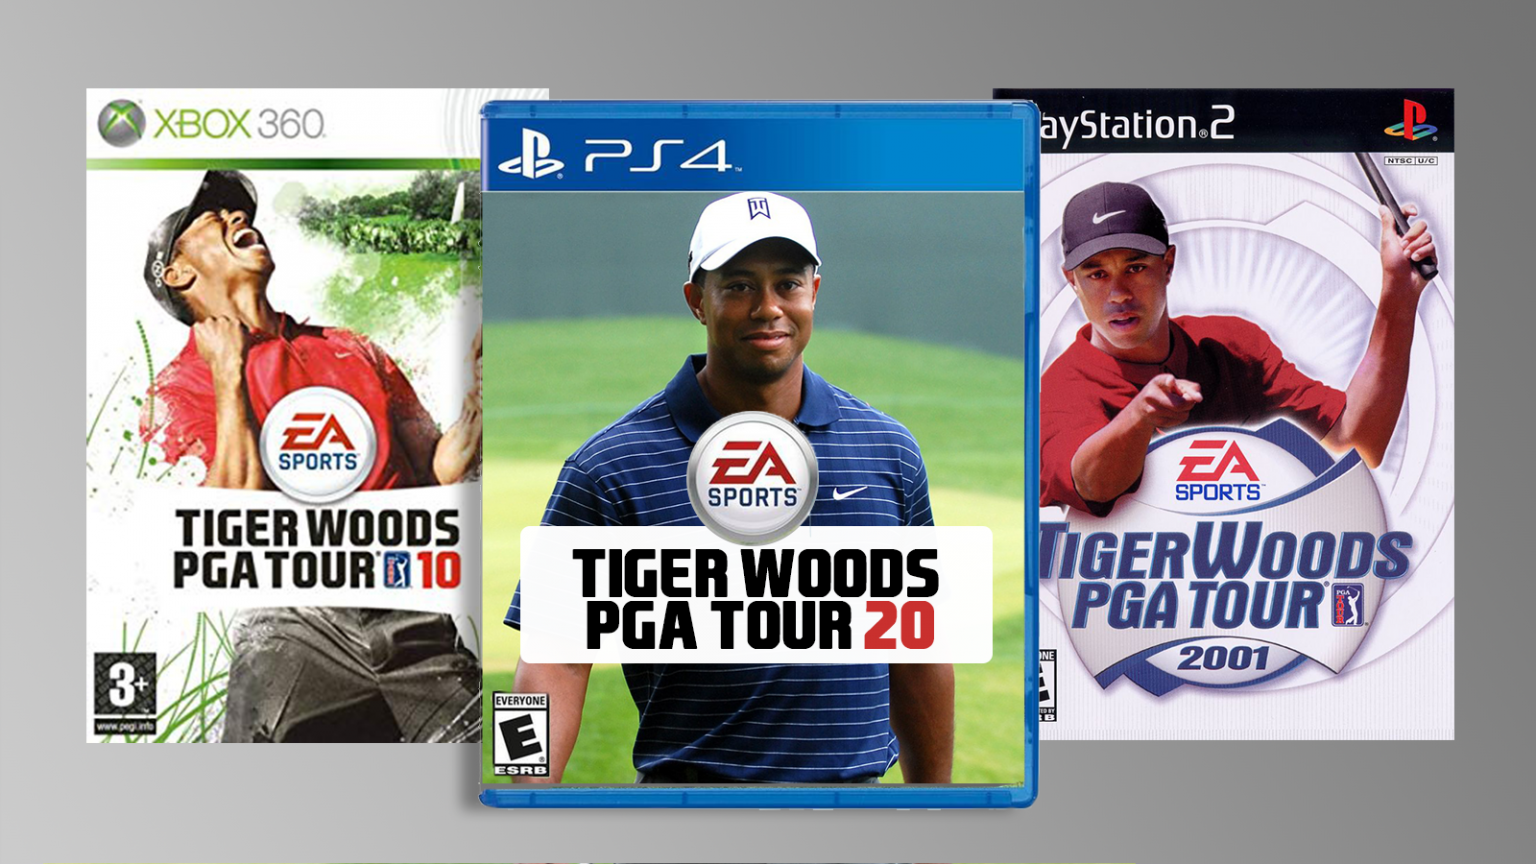 Golf fans call for new Tiger Woods PGA Tour EA Sports game in 2020